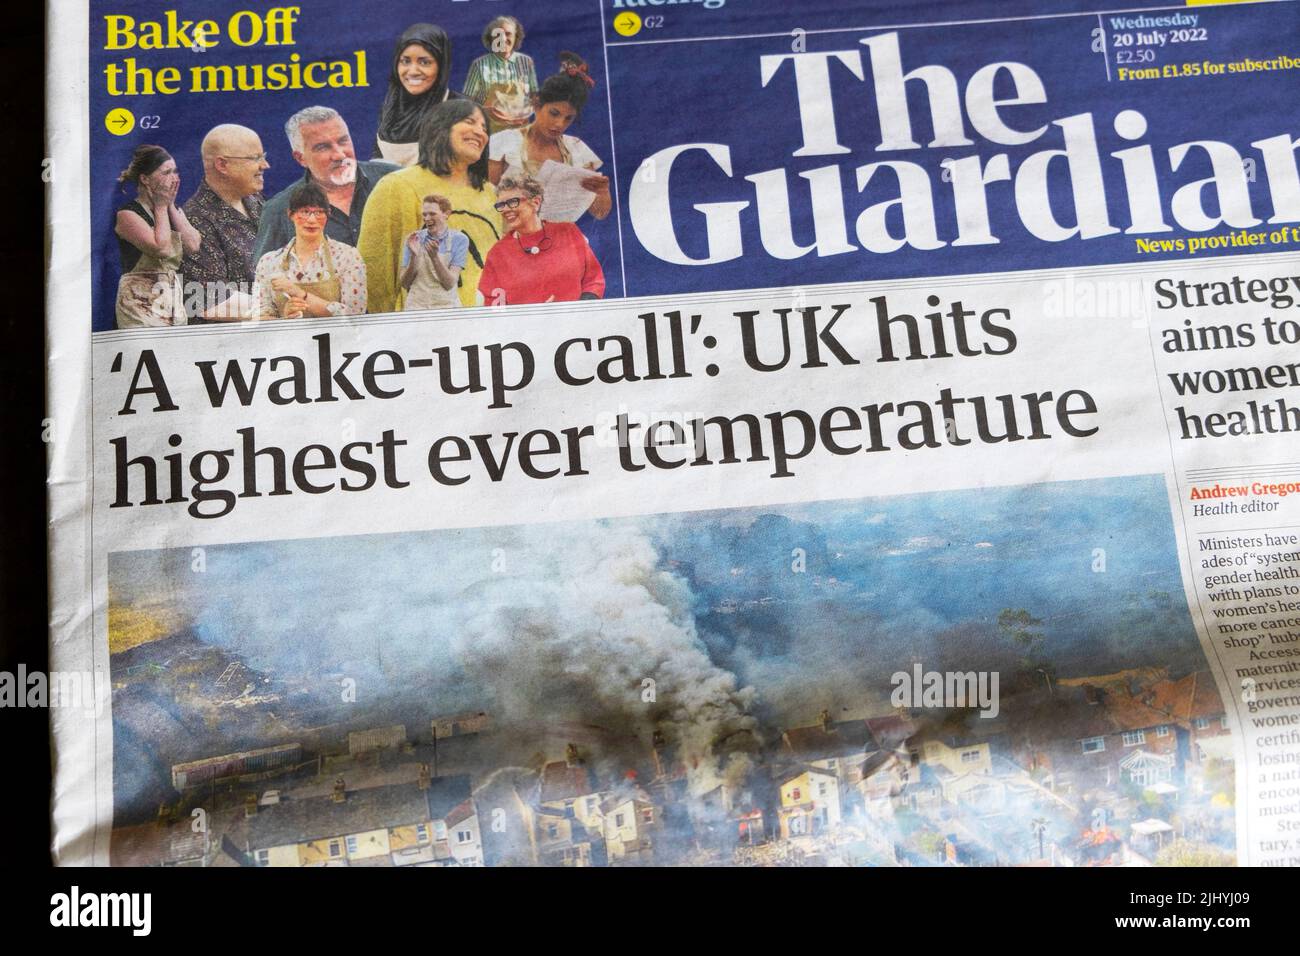 'A wake-up call: UK hits highest ever temperature' Guardian newspaper headline climate crisis front page newsstand 20th July 2022 in London England UK Stock Photo